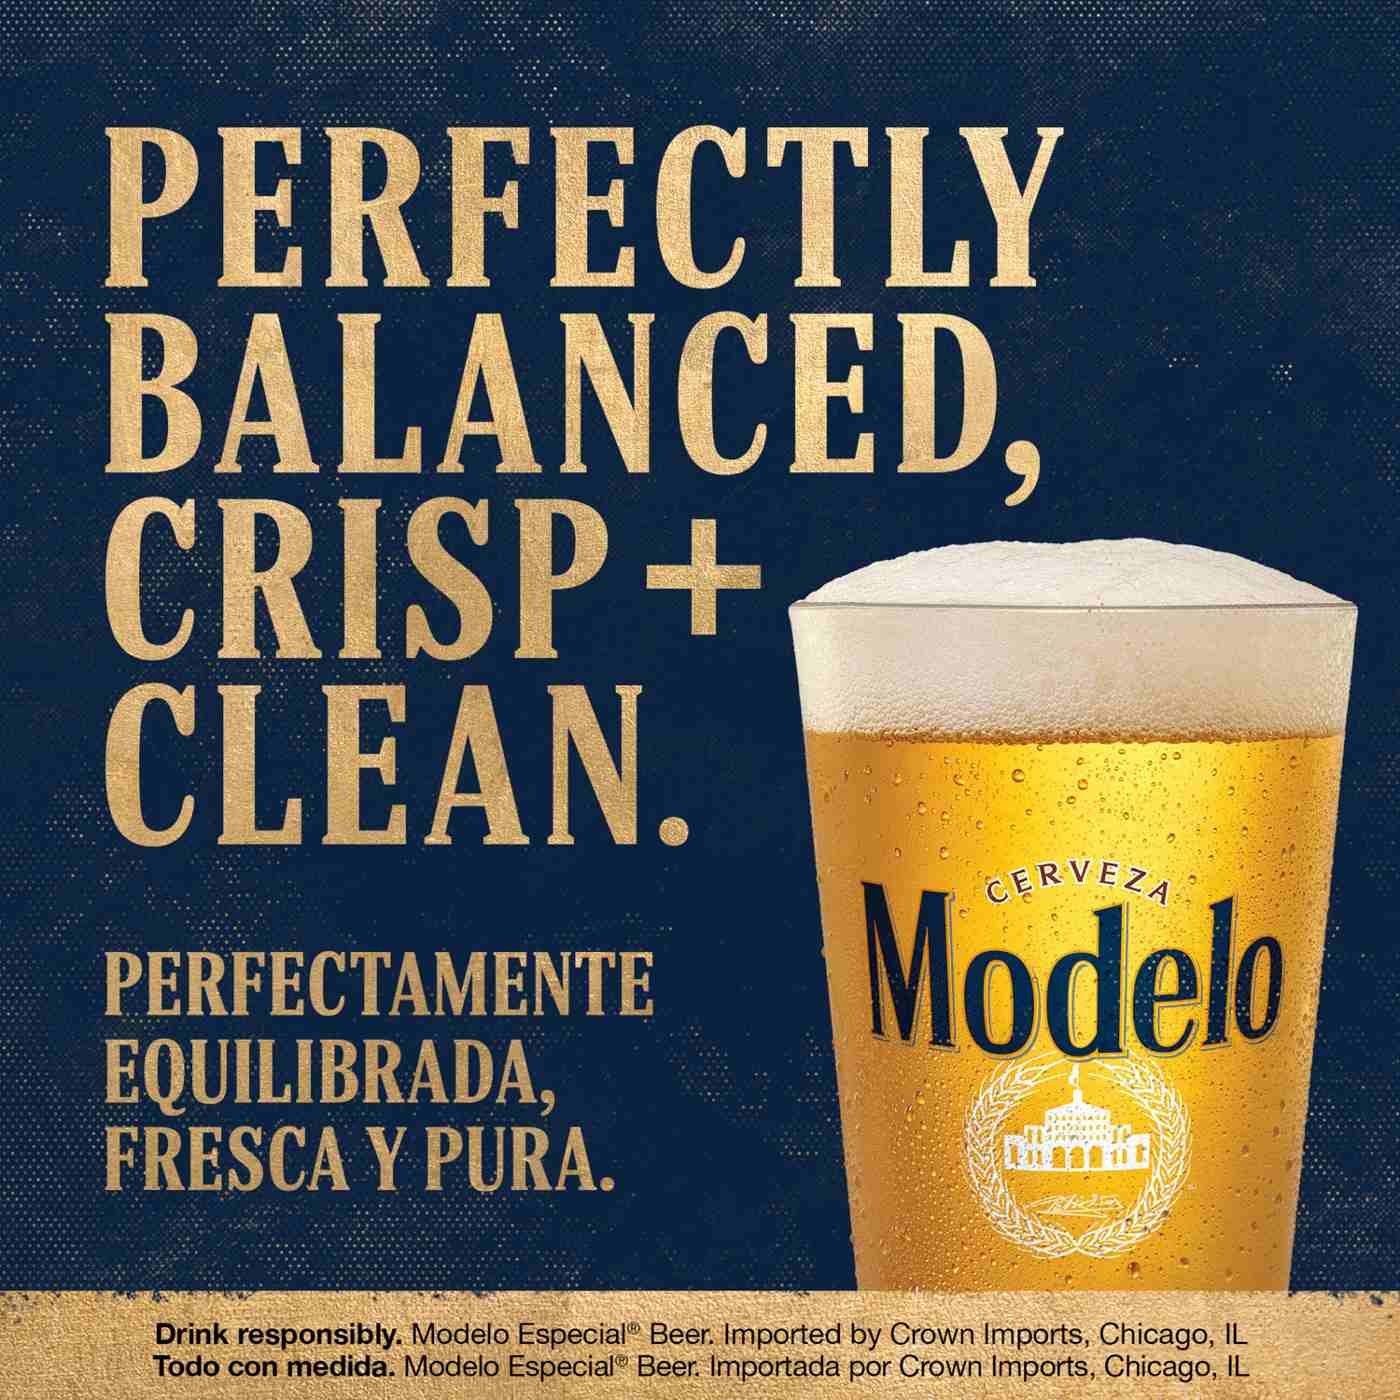 Modelo Especial Mexican Lager Import Beer 12 oz Cans, 24 pk; image 5 of 5